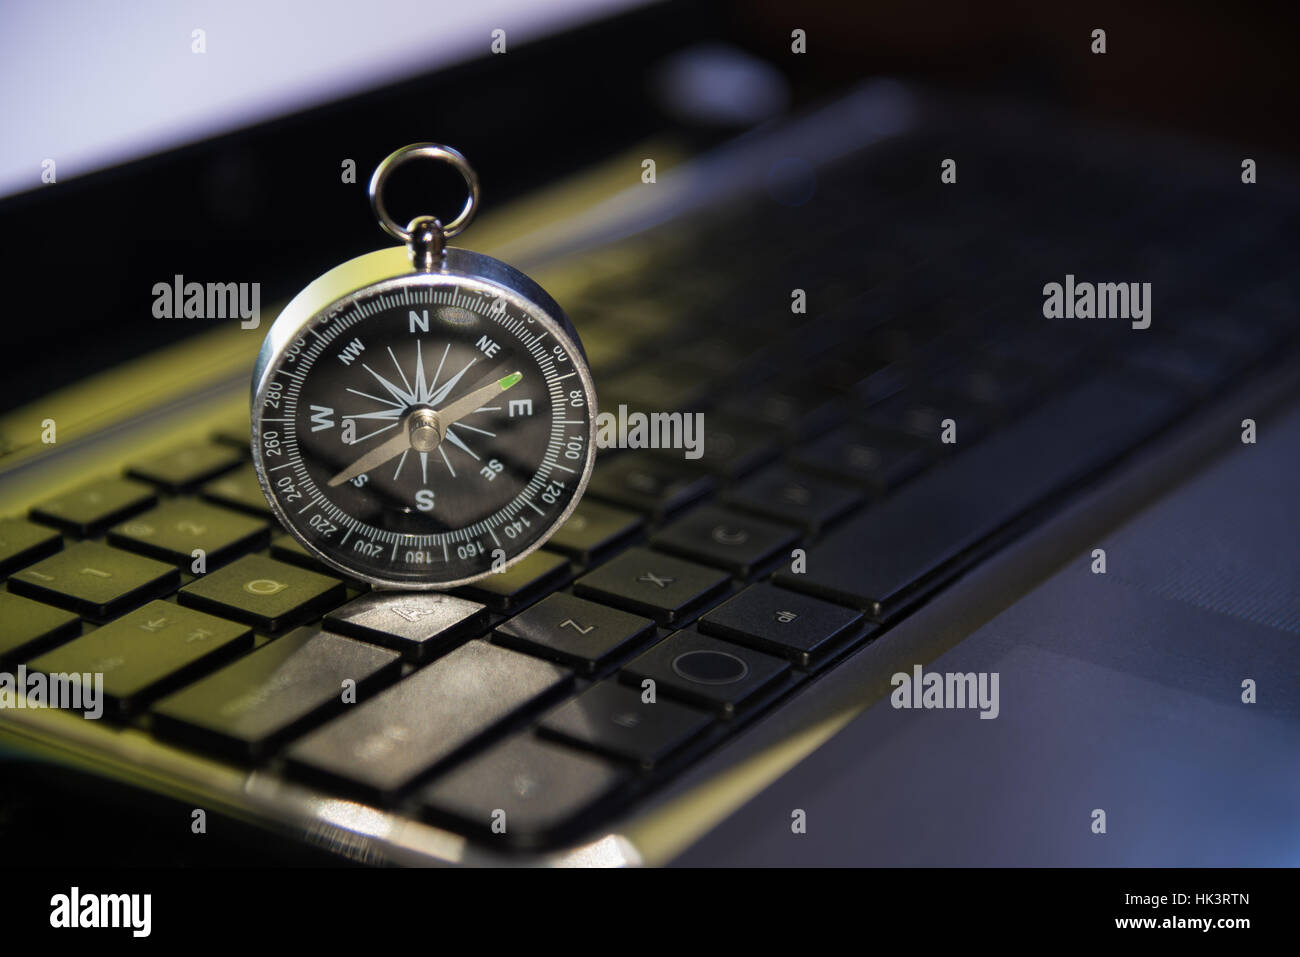 Compass shining on Keyboard metaphor to target or trend of business, marketing, finance, economy, internet concept background Stock Photo